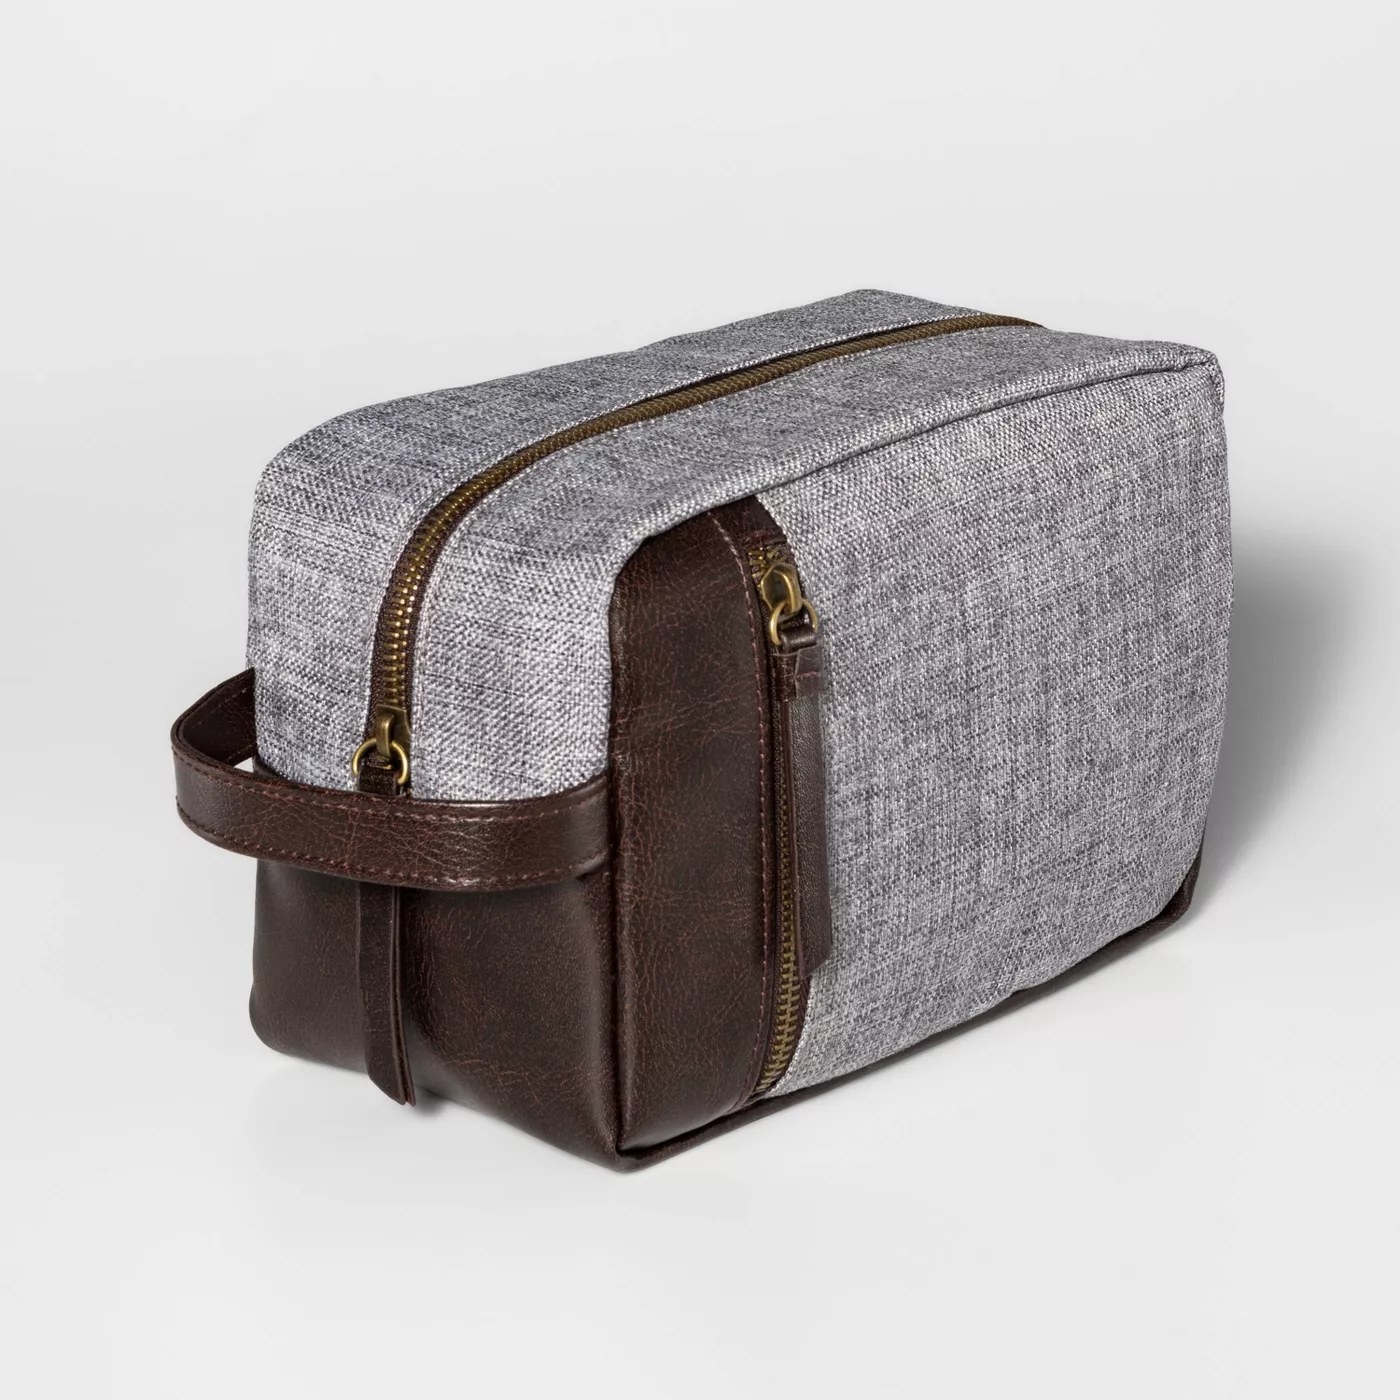 The dopp kit with a gray fabric exterior and brown leather accents